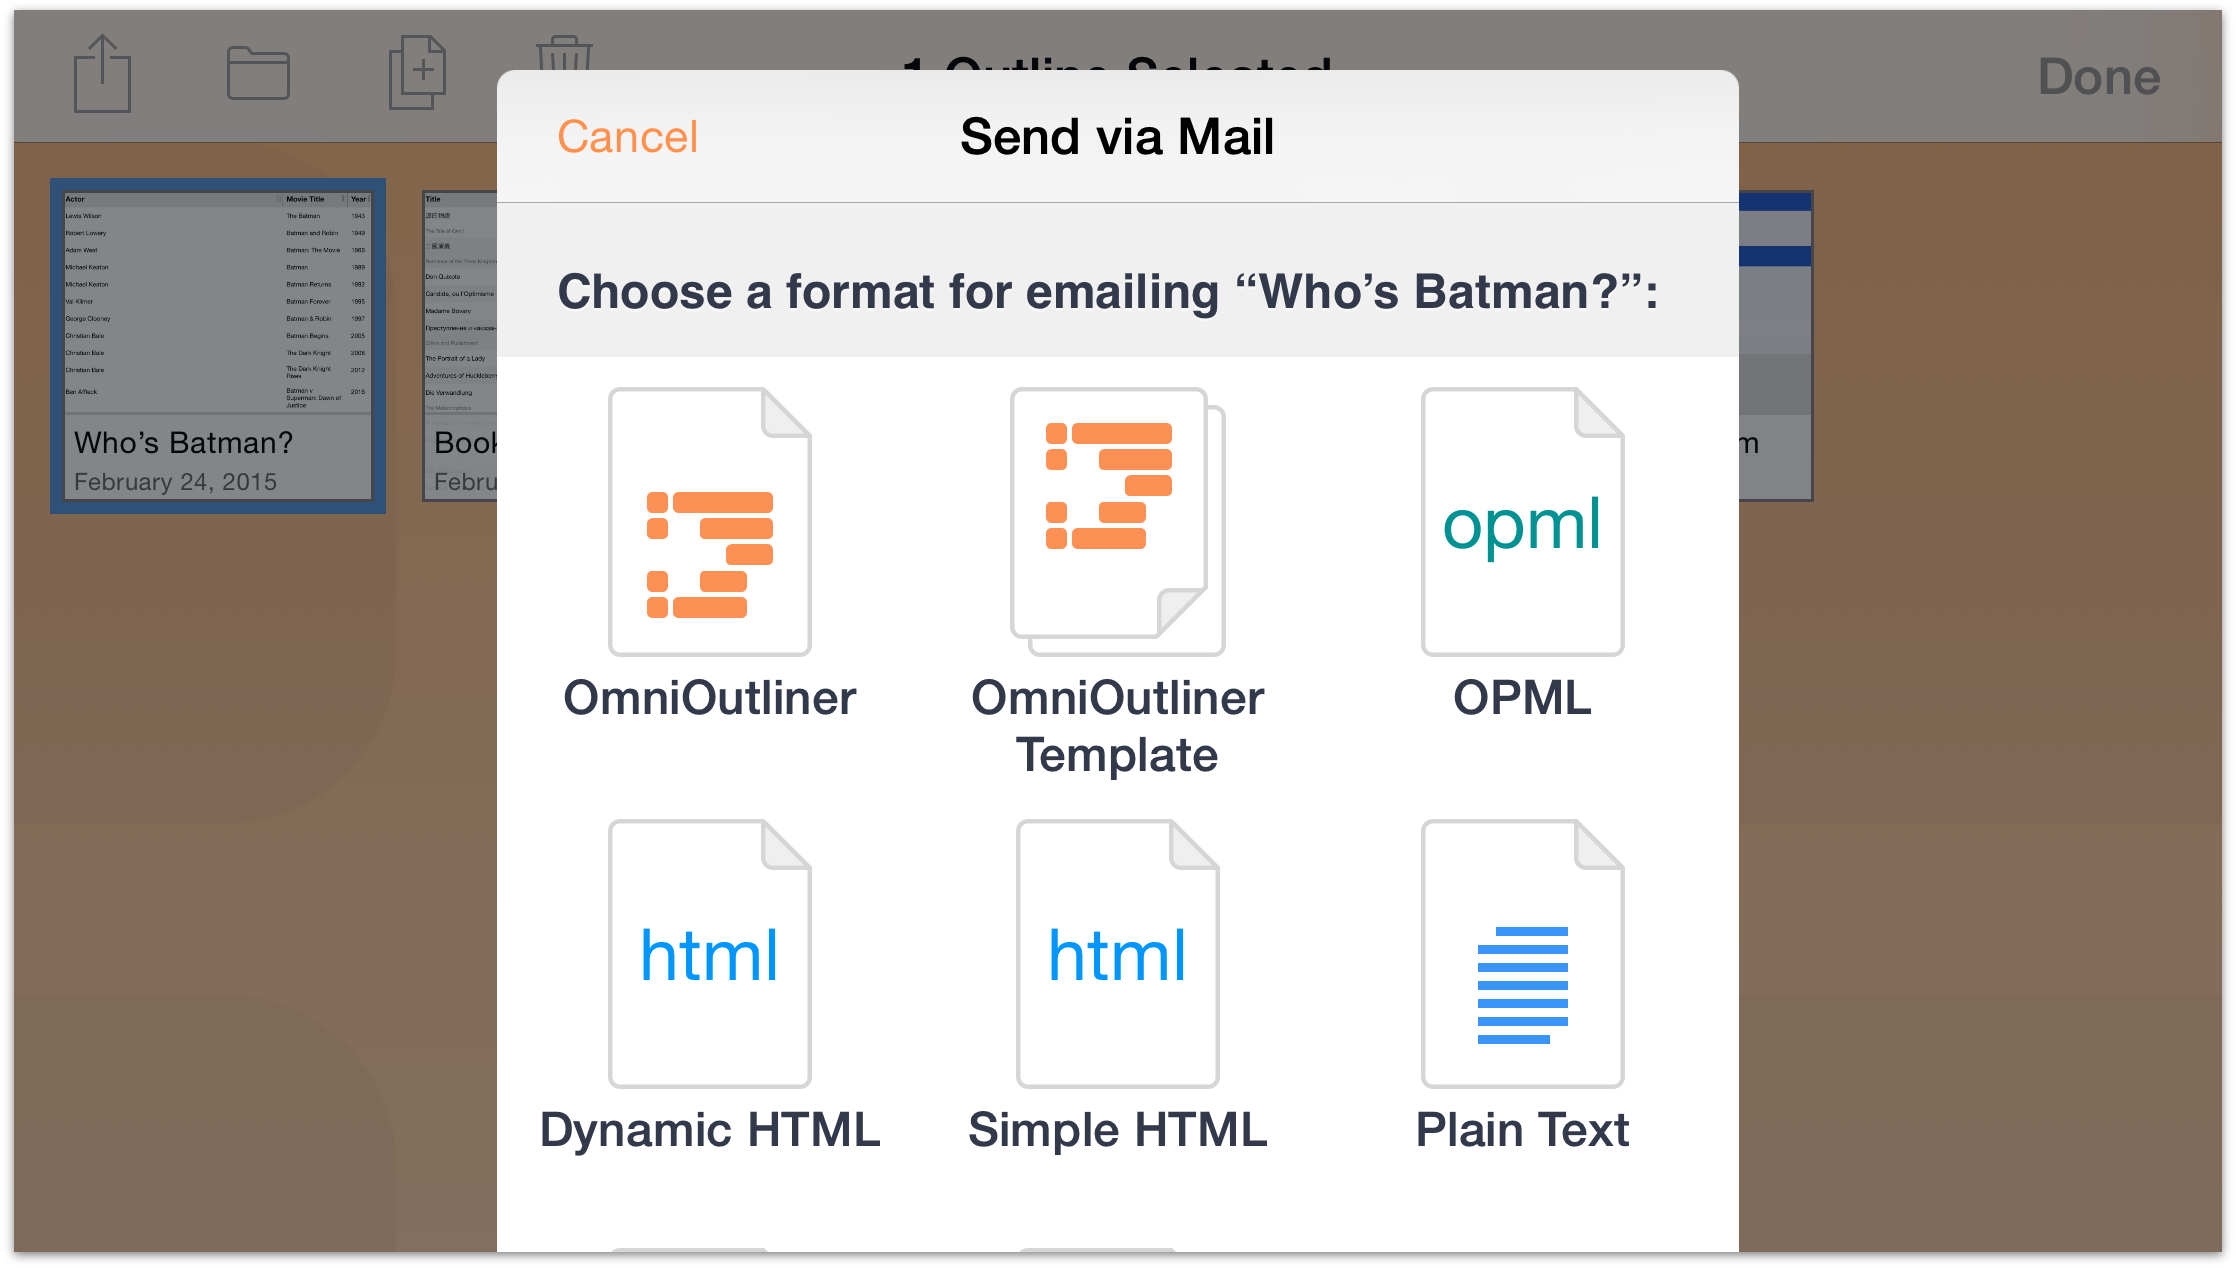 Choose the document format you would like to send as an email attachment.